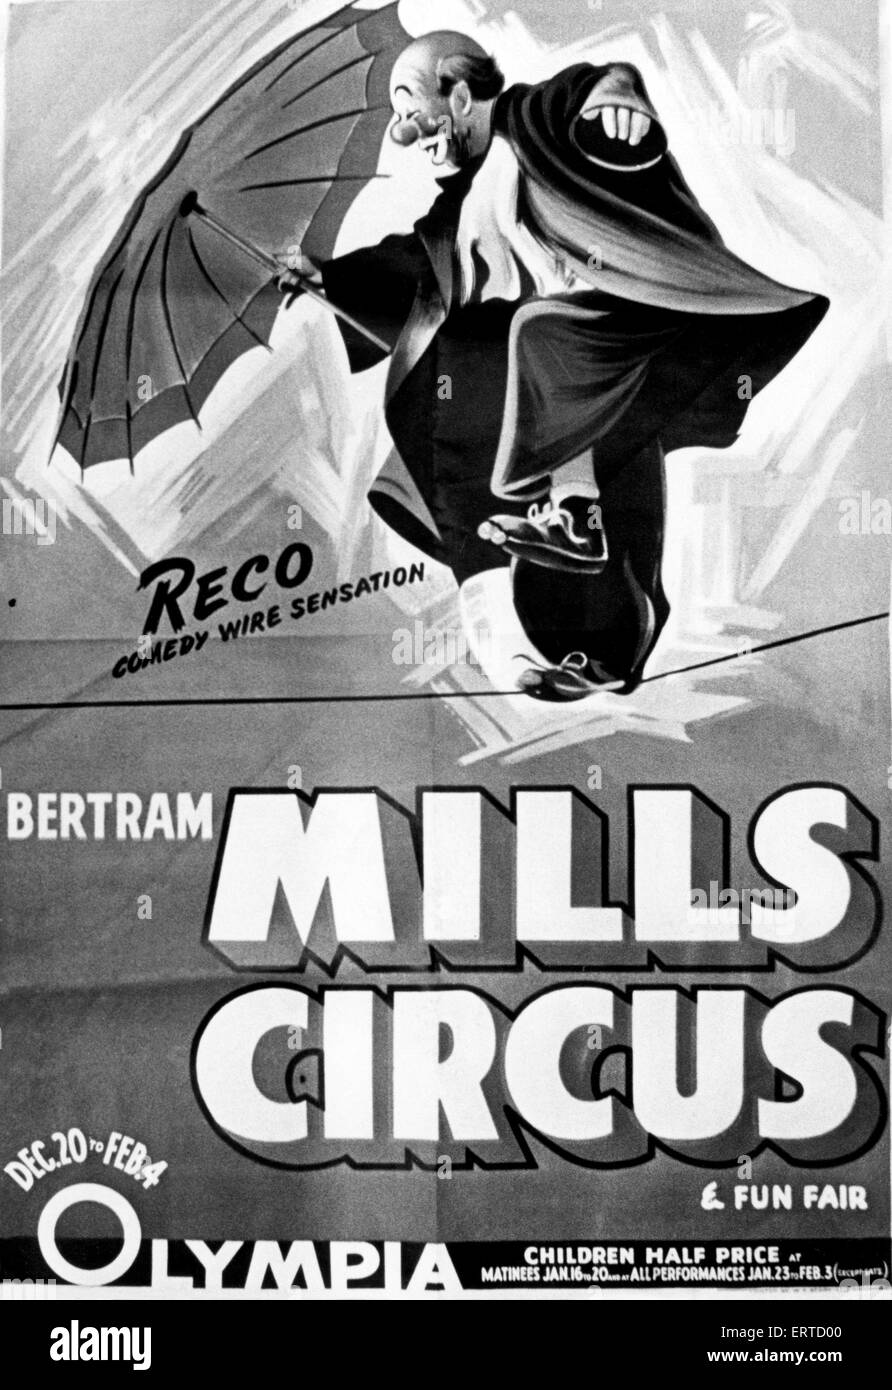 Poster for Bertram Mills Circus, image shows Reco comedy wire sensation. 20th July 1979. Stock Photo